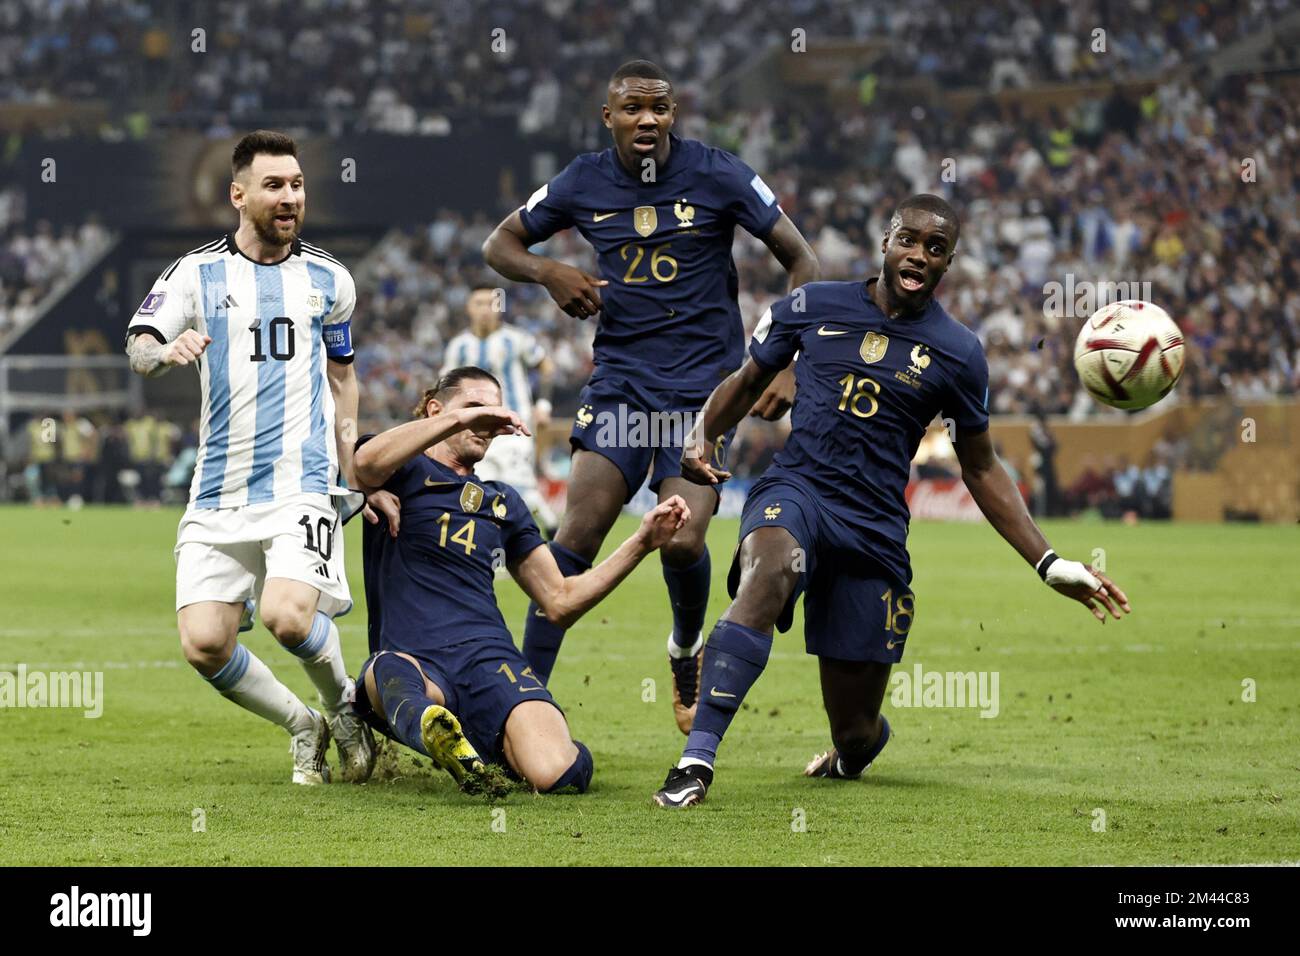 AL DAAYEN - (l-r) Lionel Messi of Argentina, Adrien Rabiot of France, Marcus Thuram of France, Dayot Upamecano of France during the FIFA World Cup Qatar 2022 final match between Argentina and France at Lusail Stadium on December 18, 2022 in Al Daayen, Qatar. AP | Dutch Height | MAURICE OF STONE Stock Photo